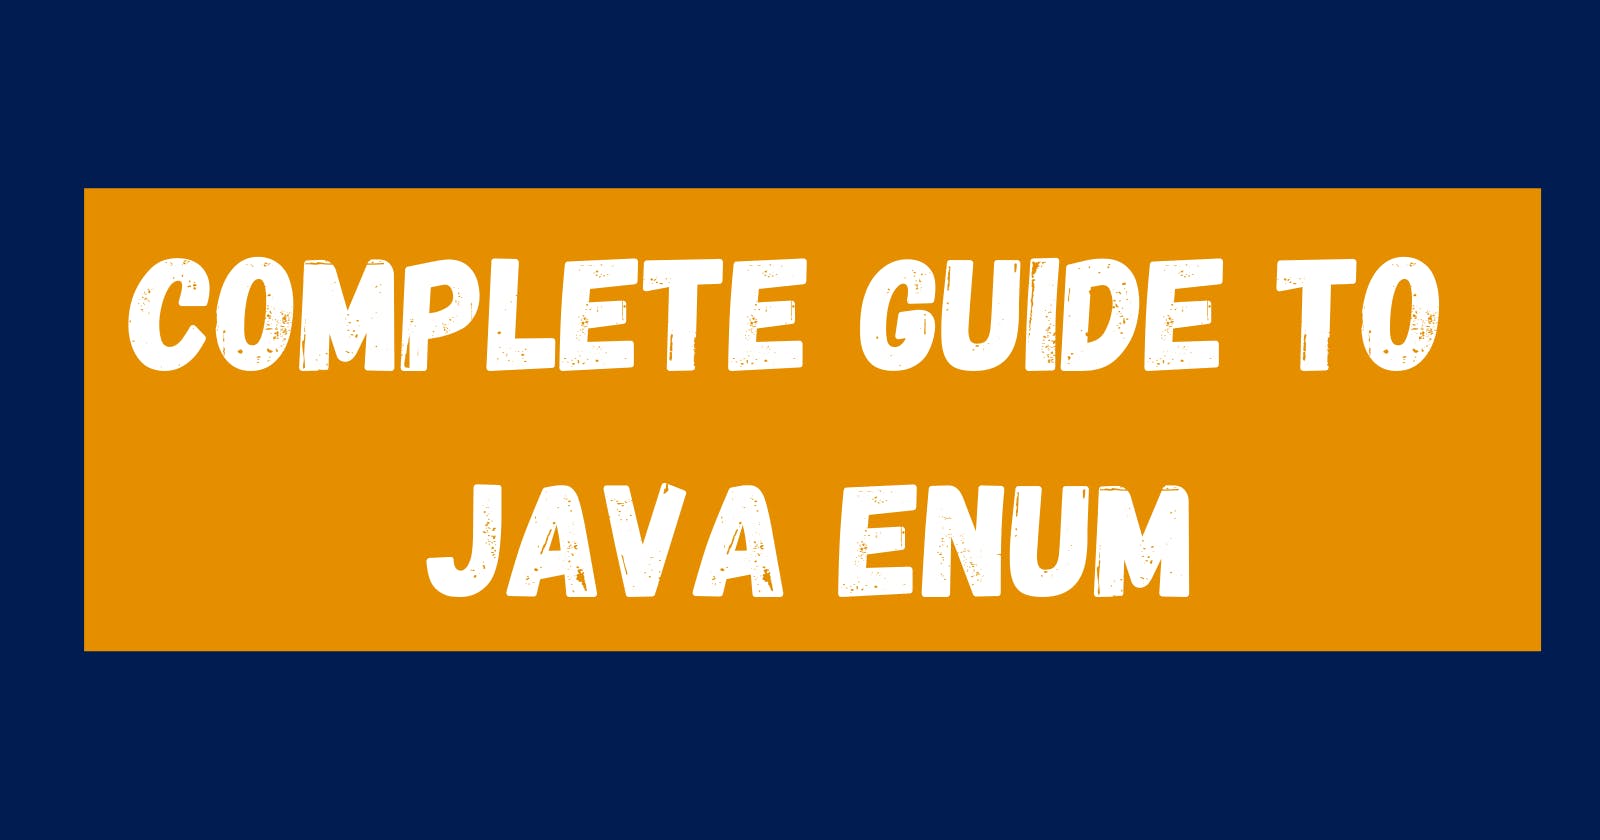 Complete Guide to Java enum